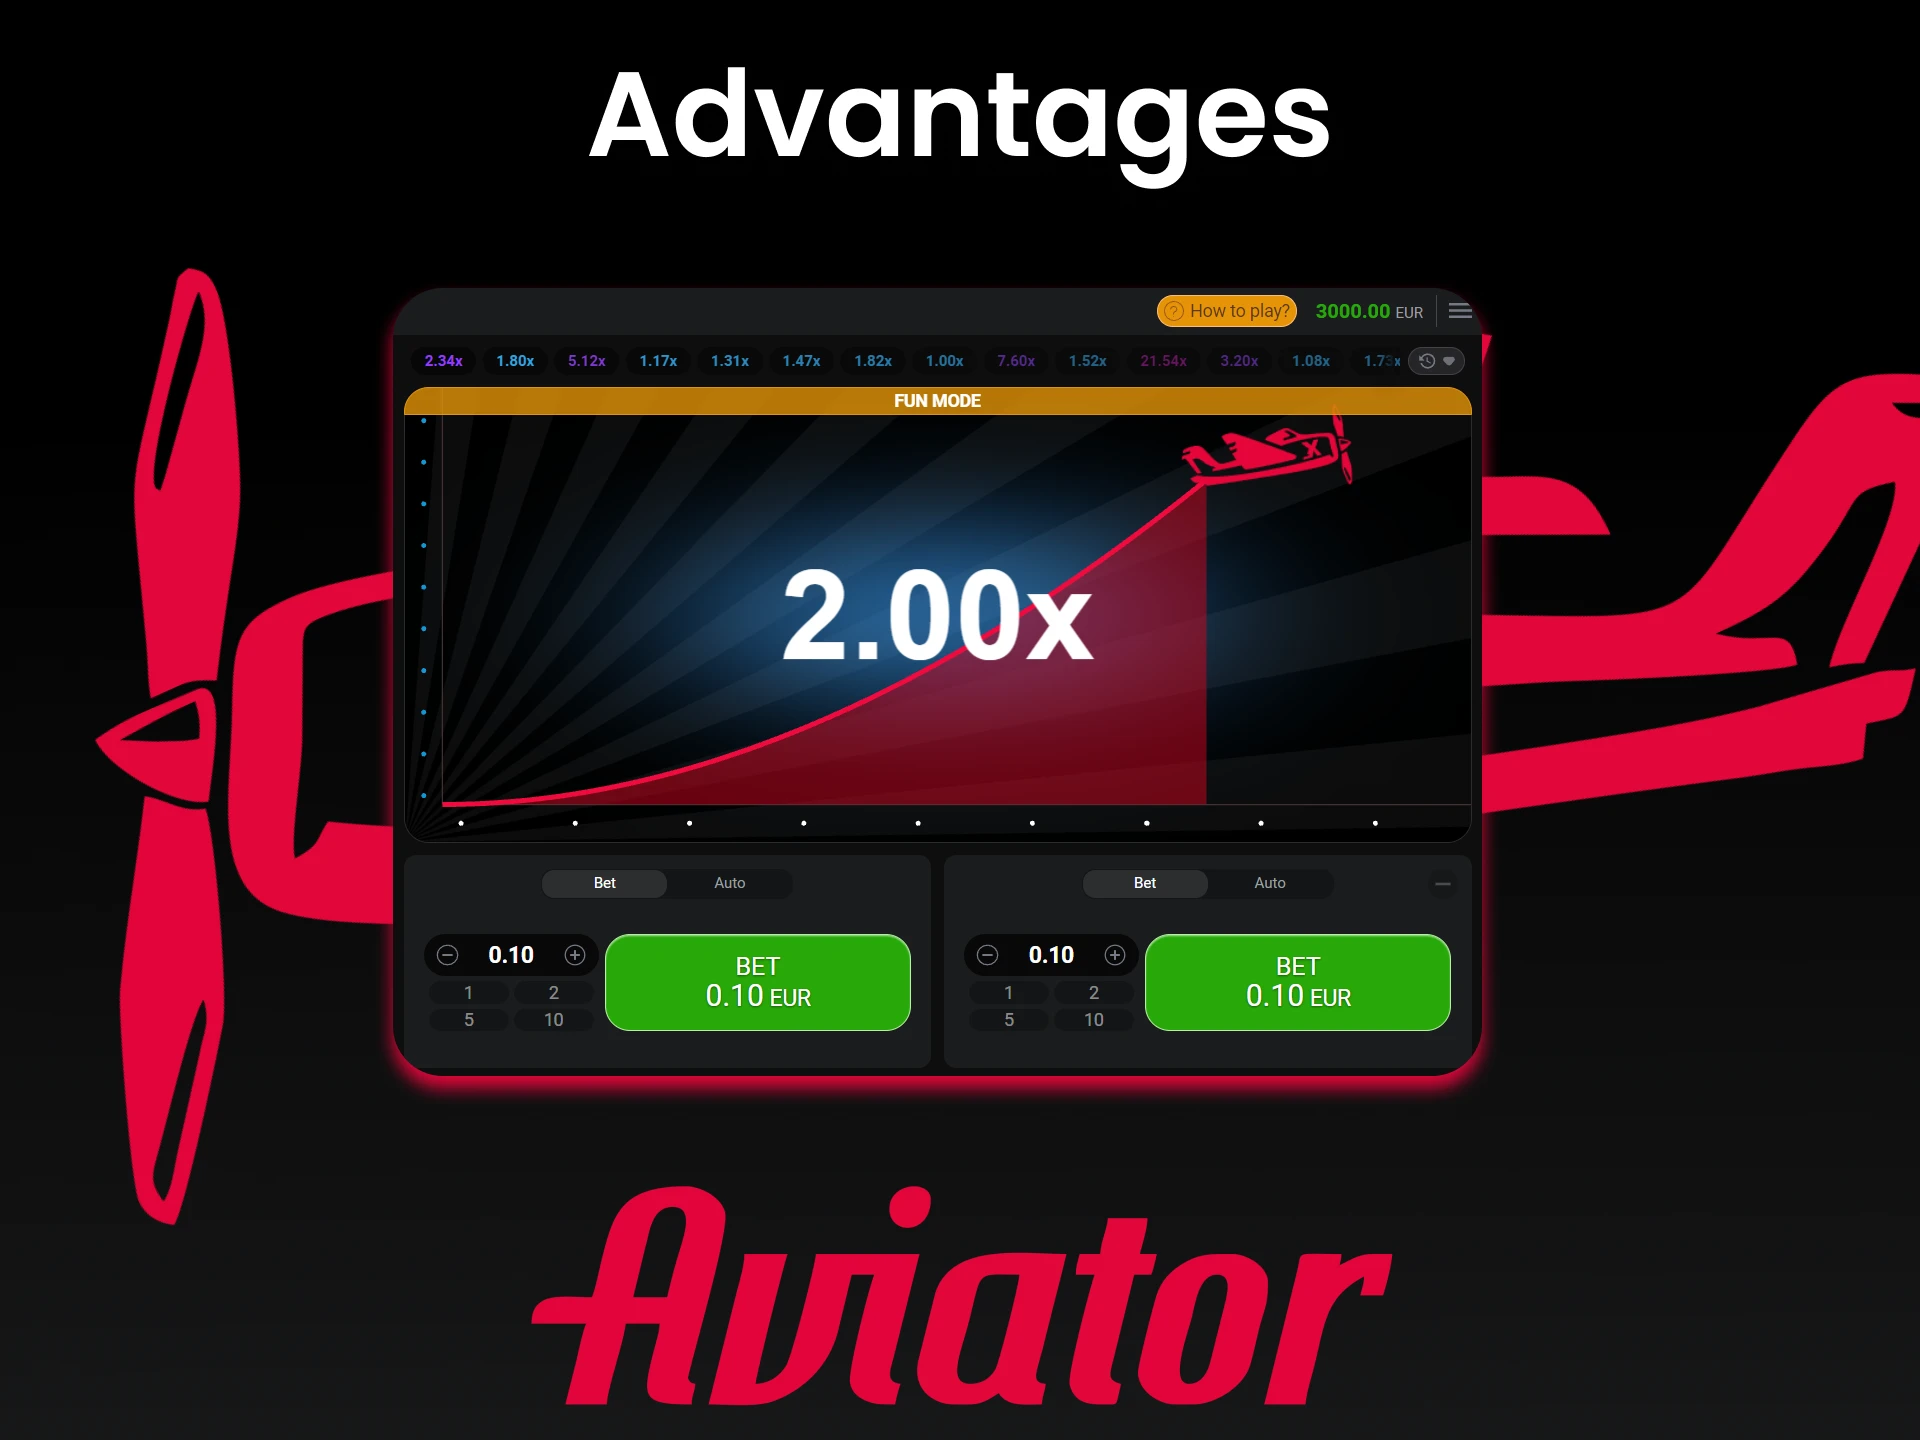 Find out all the advantages of the game Aviator.